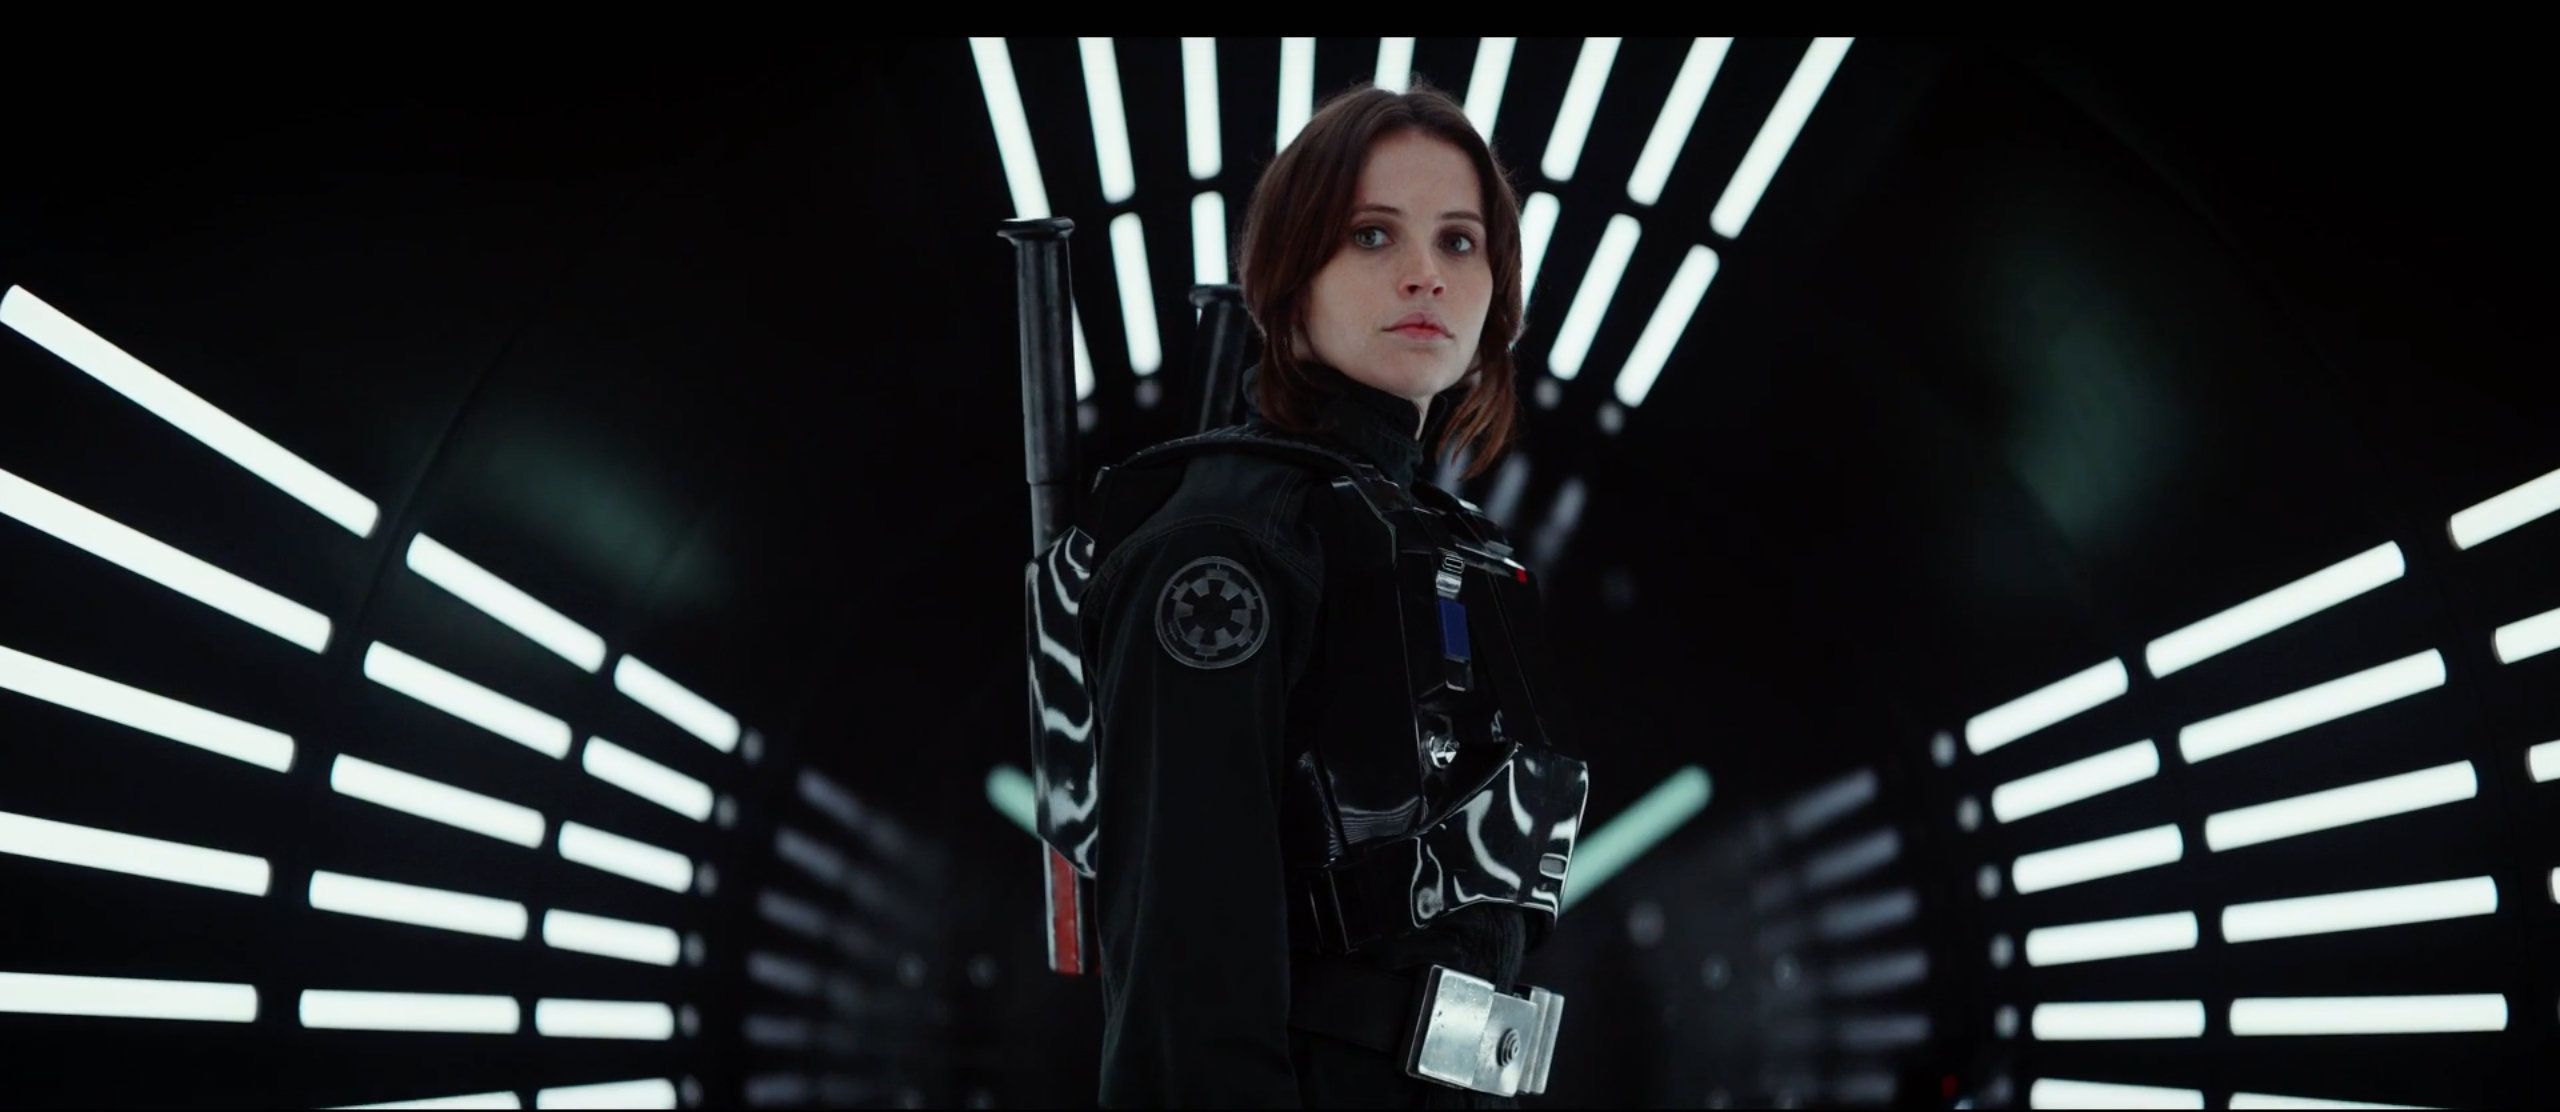 Rogue One Title Meaning: Here's What the Title of the New Star Wars Film  Means